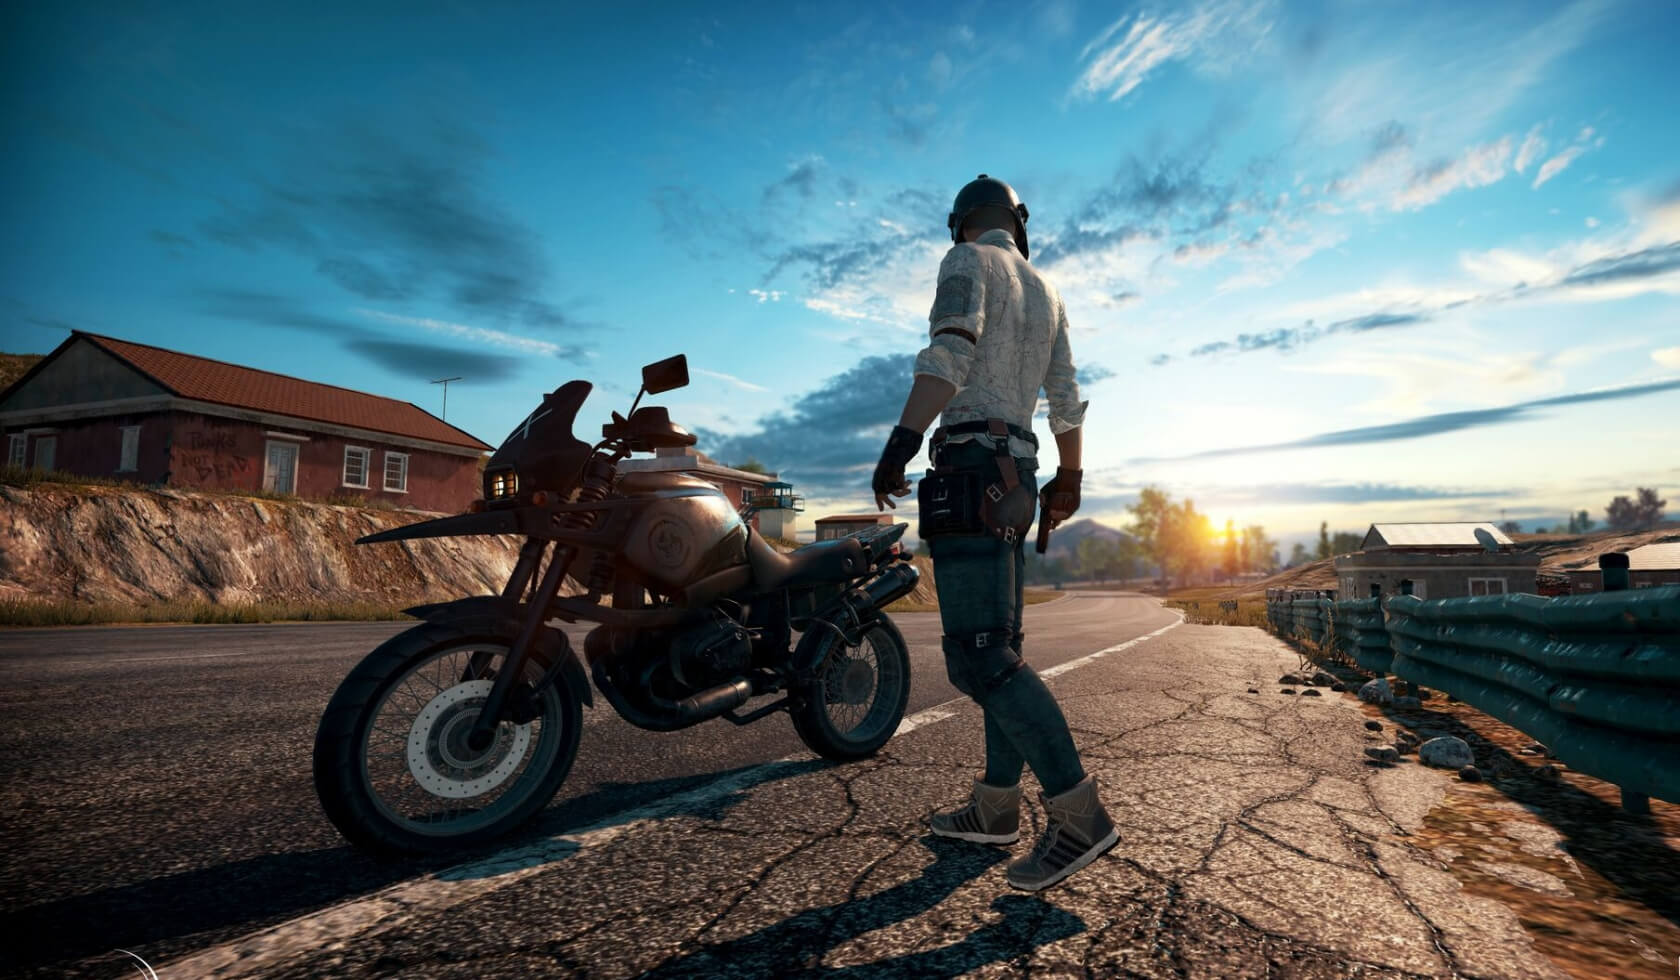 PUBG suffers from horrendous performance issues on the Xbox One consoles